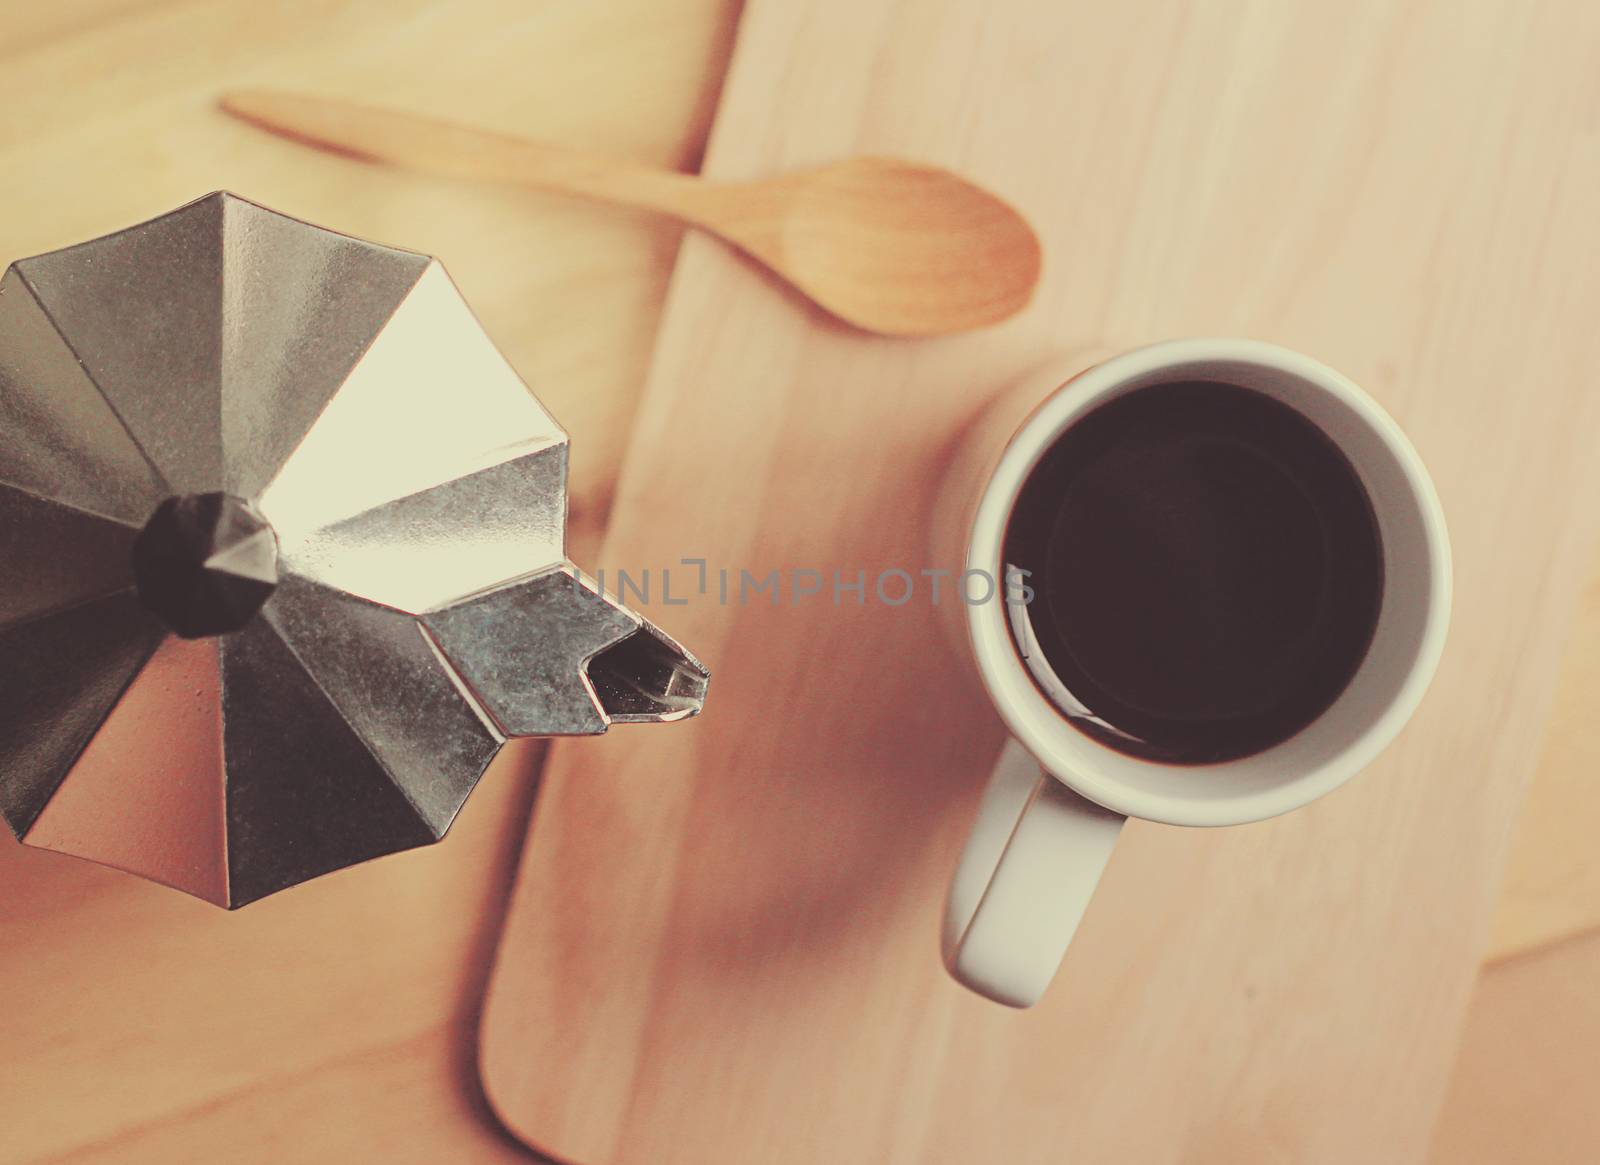 Hot coffee and moka pot with wooden spoon, retro filter effect by nuchylee